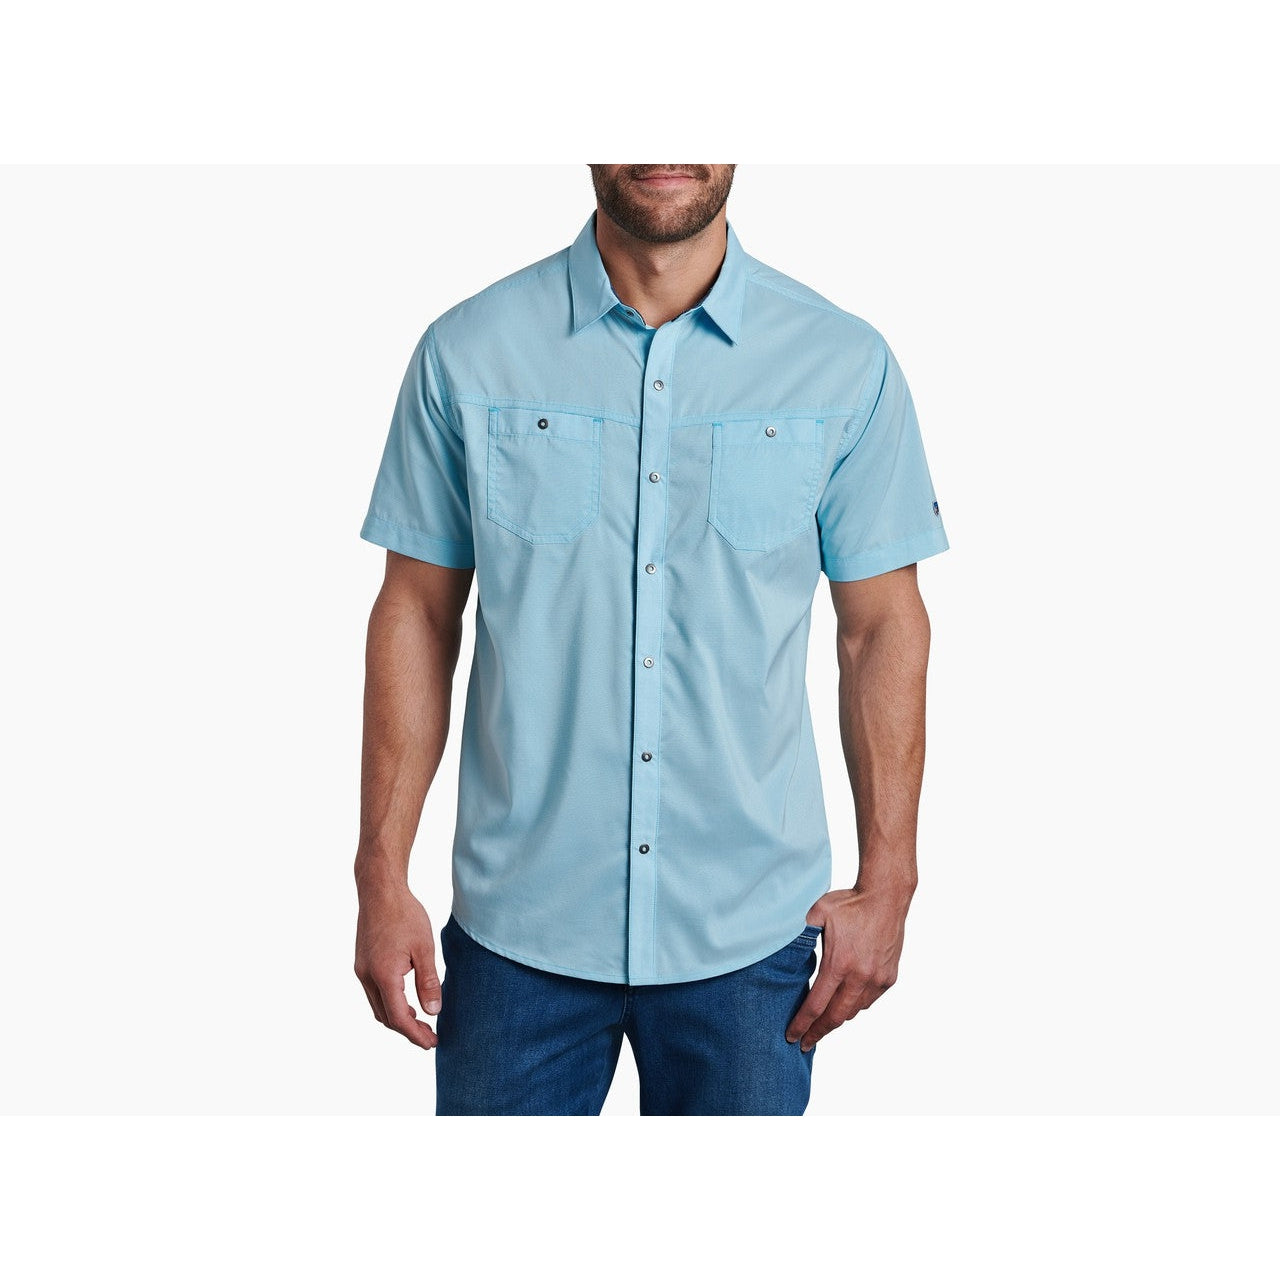 Kuhl Men's Stealth Short Sleeve Shirt-MENS CLOTHING-SEA BREEZE-S-Kevin's Fine Outdoor Gear & Apparel